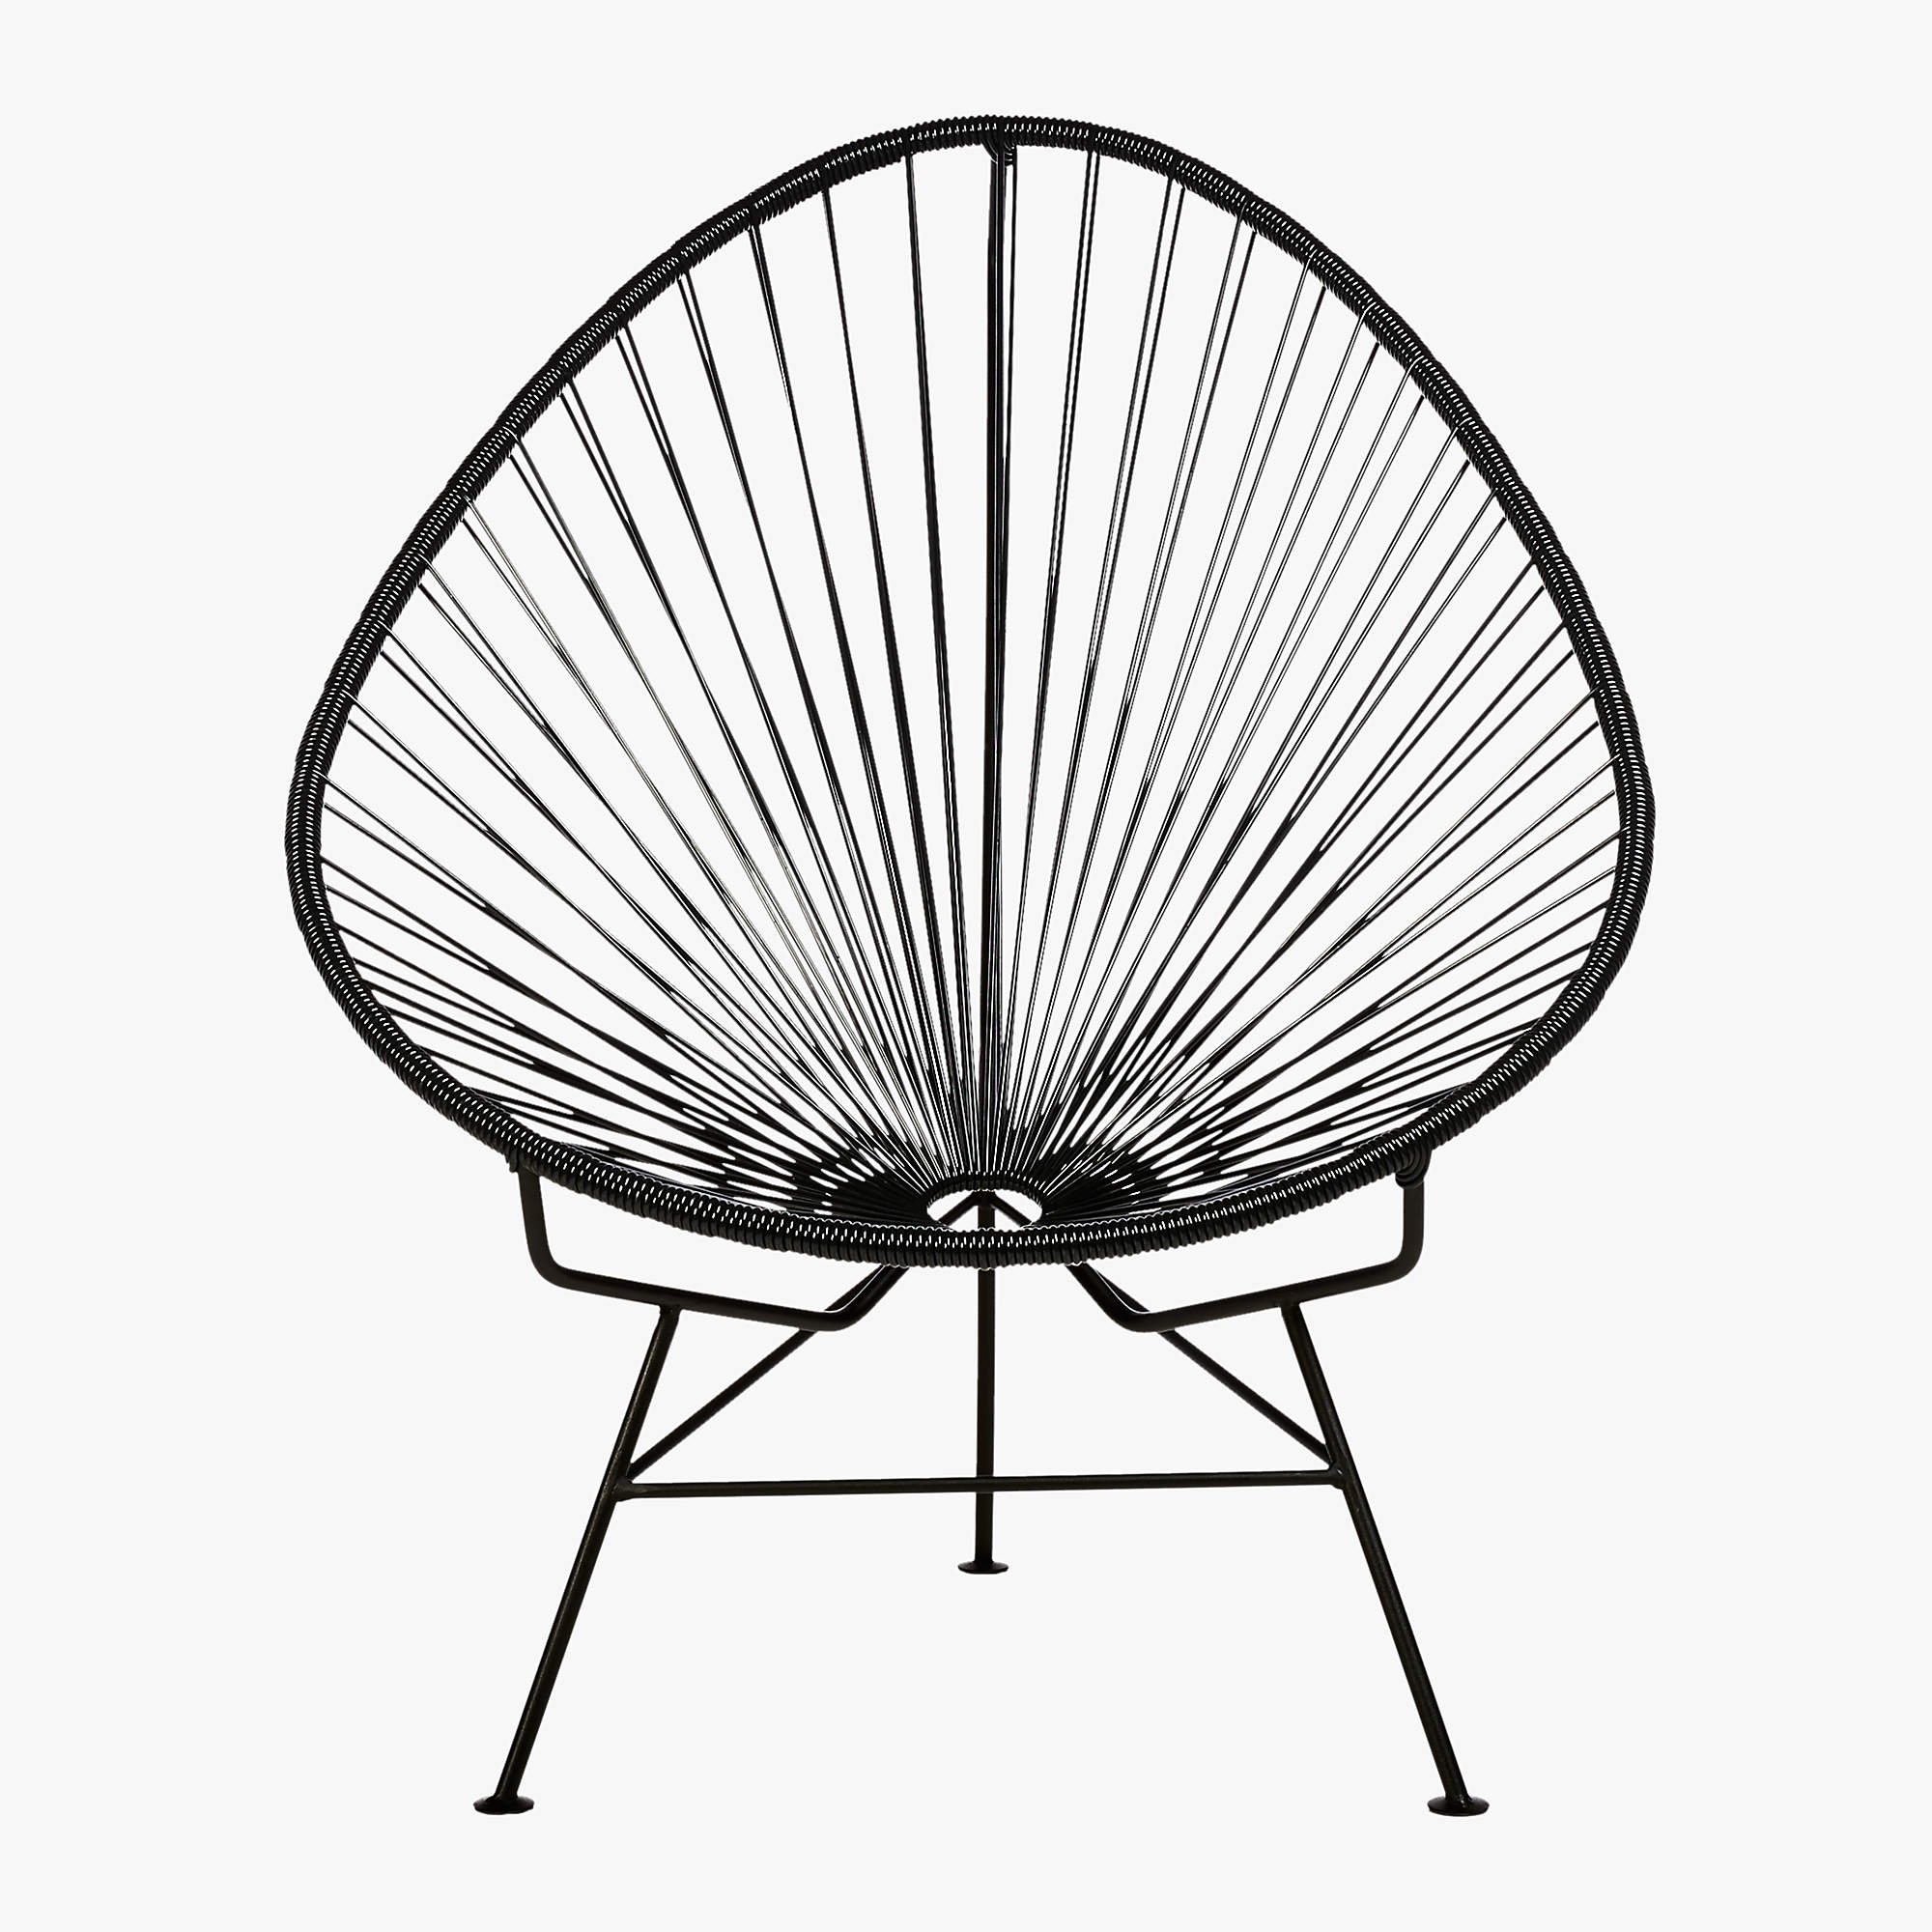 Acapulco black lounge chair from CB2 has a round and modern profile achieved by its black powdercoated steel and PVC cord frame.